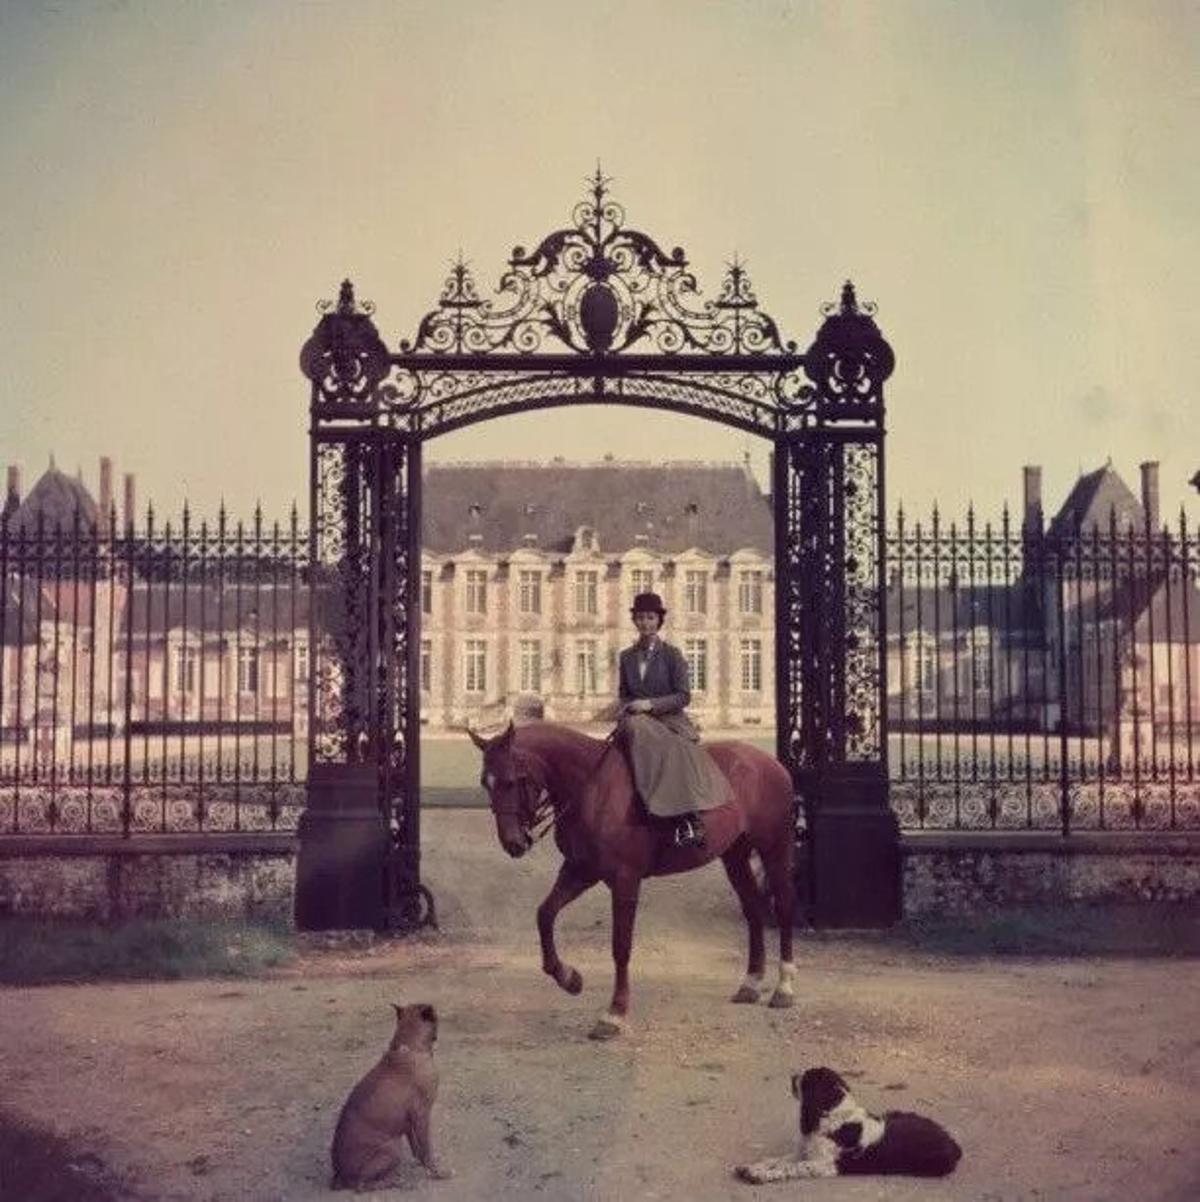 Equestrian Entrance 
1957
by Slim Aarons

printed 2023

Slim Aarons Limited Estate Edition

Madame de la Haye-Jousselin on her horse at the gates to her chateau in Normandy. 

unframed
c type print

16×20 inches - paper size


Limited to 150 prints